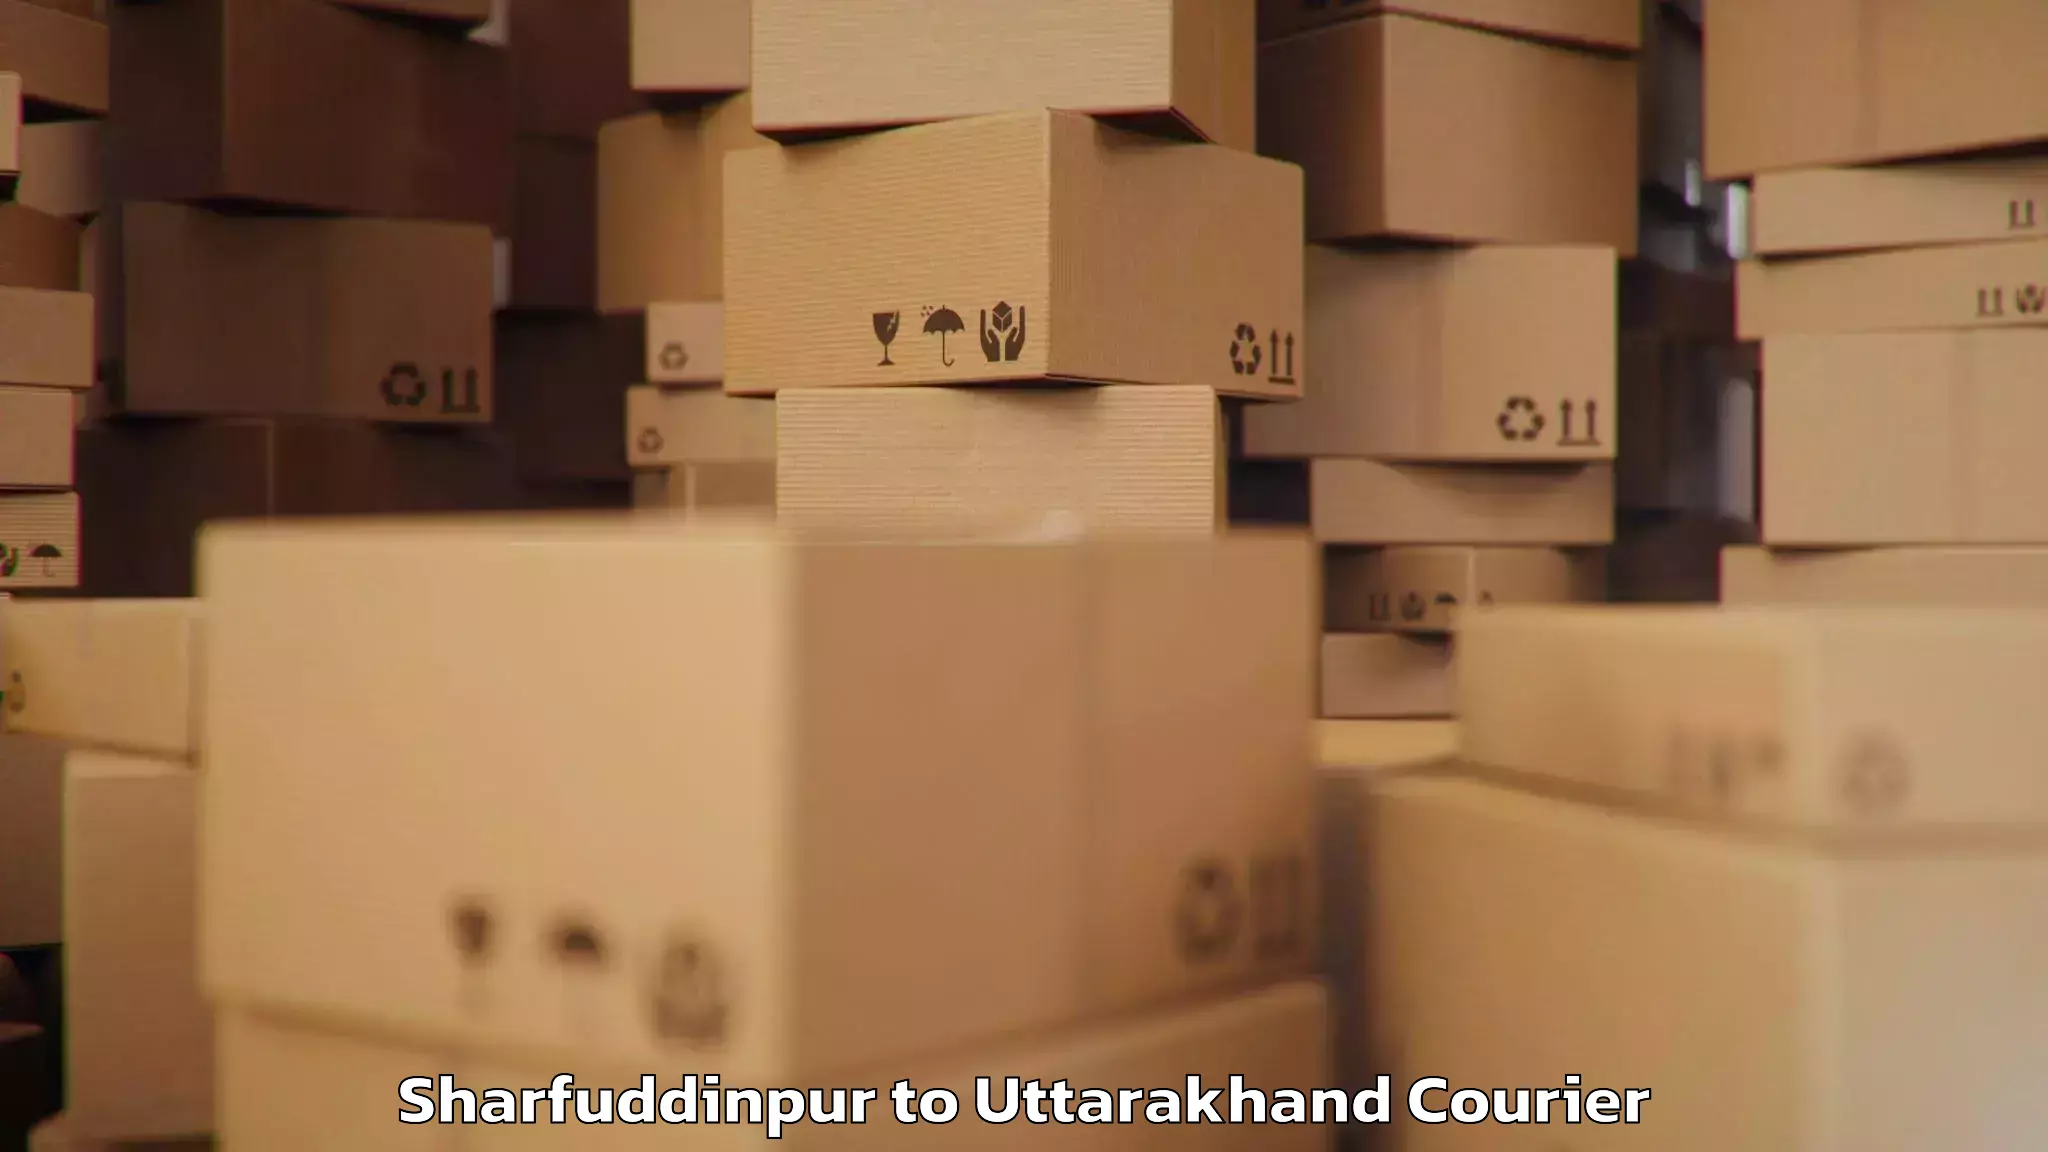 Baggage shipping experience in Sharfuddinpur to Uttarakhand